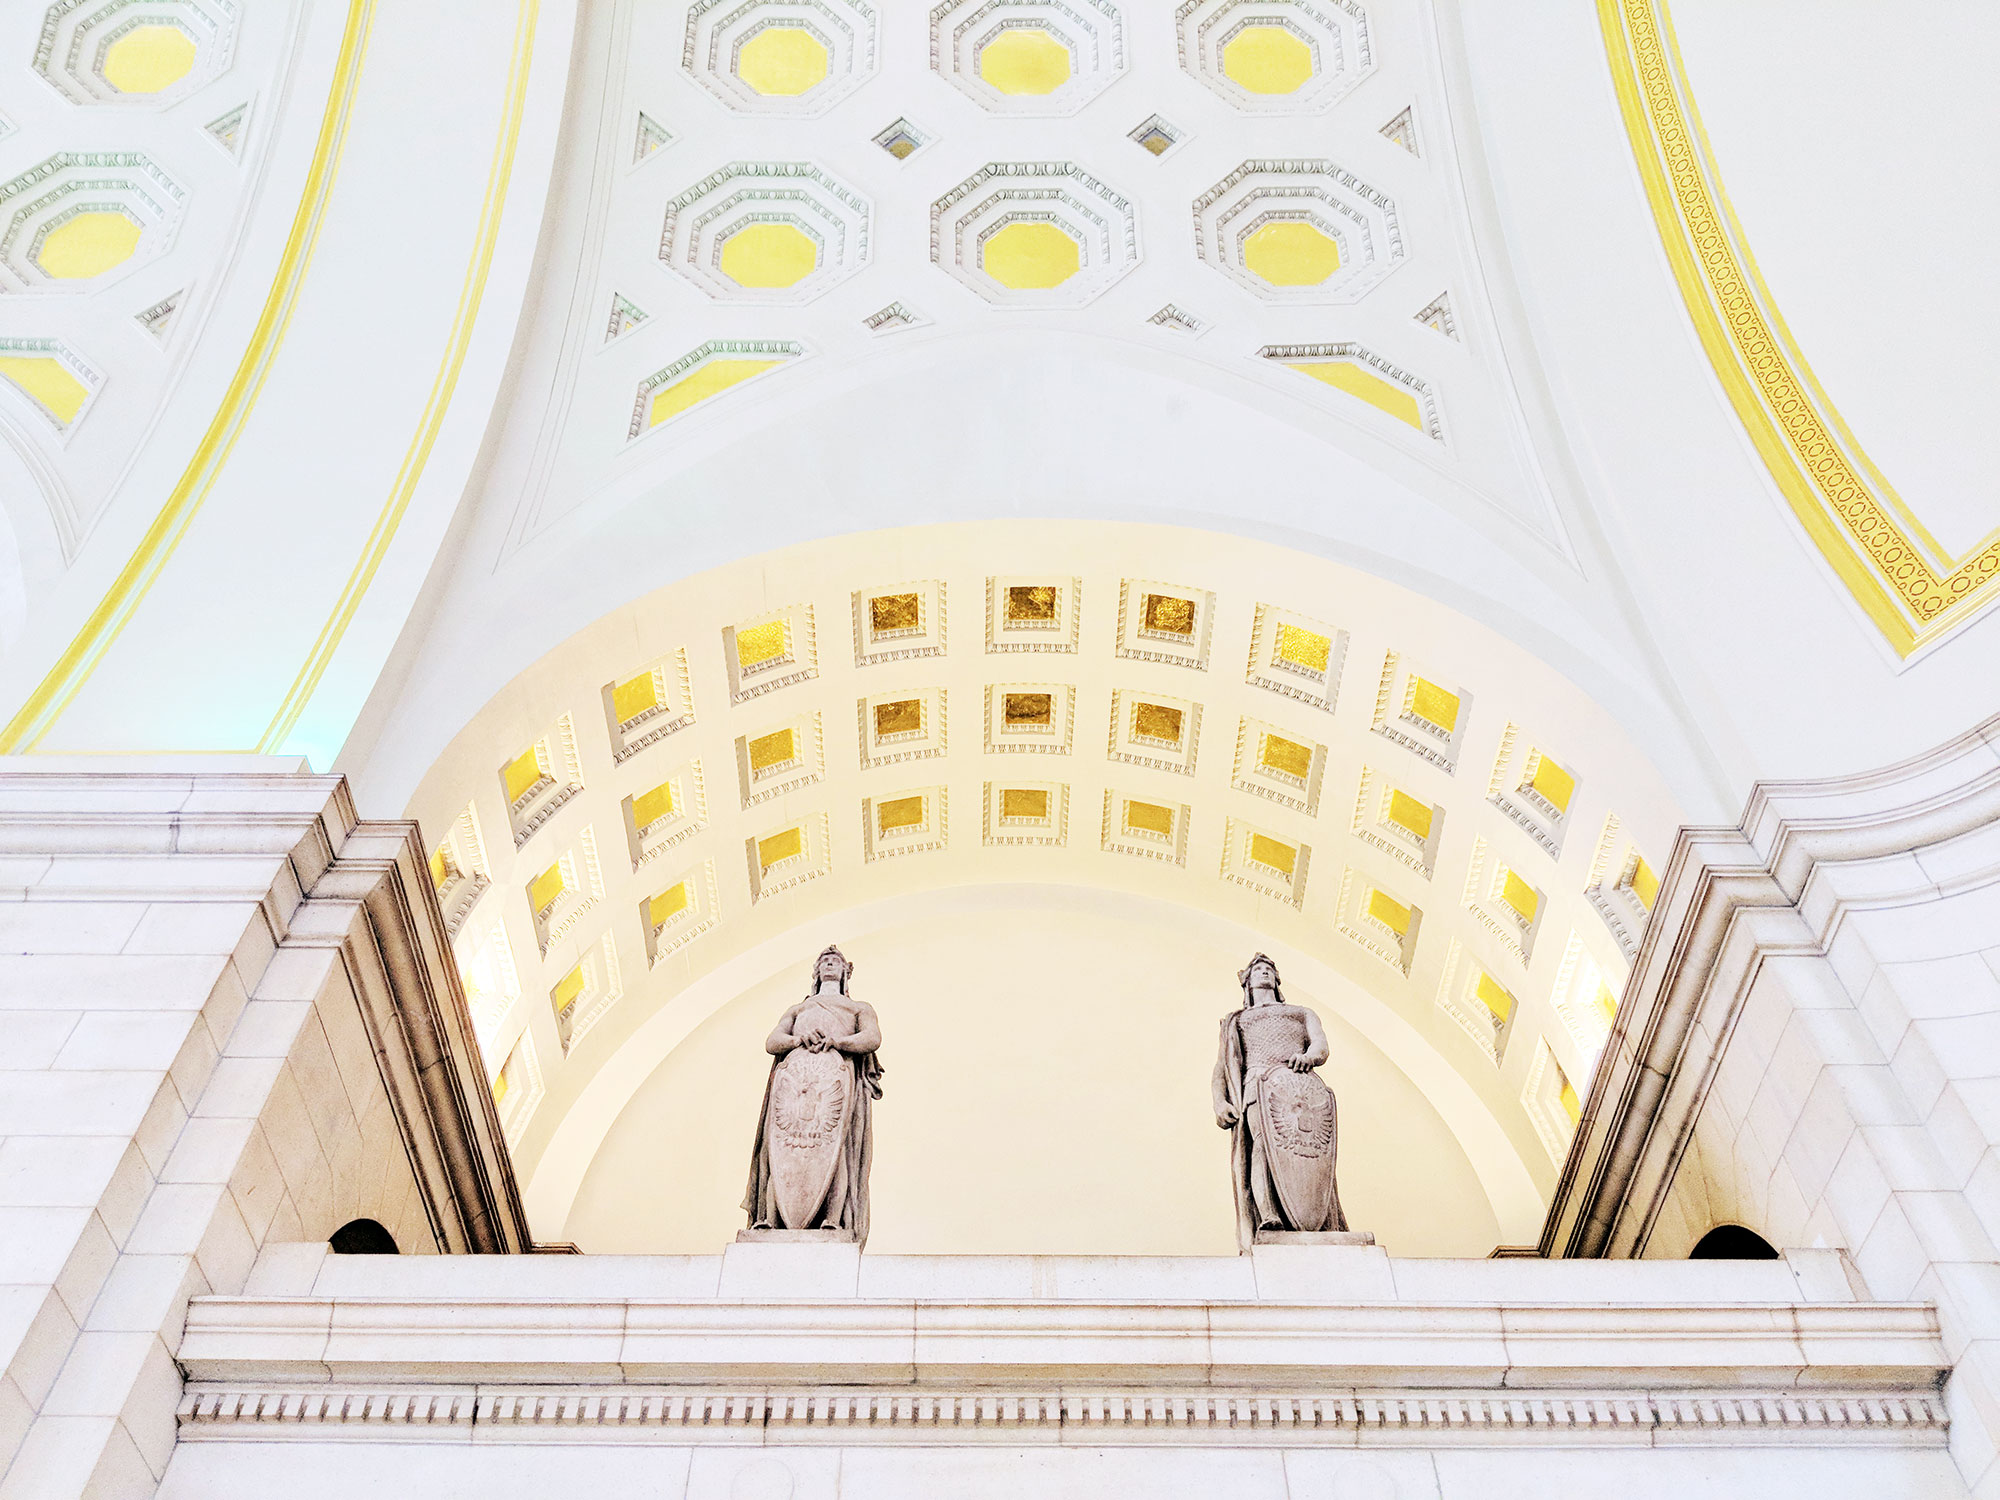 The statues lining the main hall of Union Station in Washington D.C.